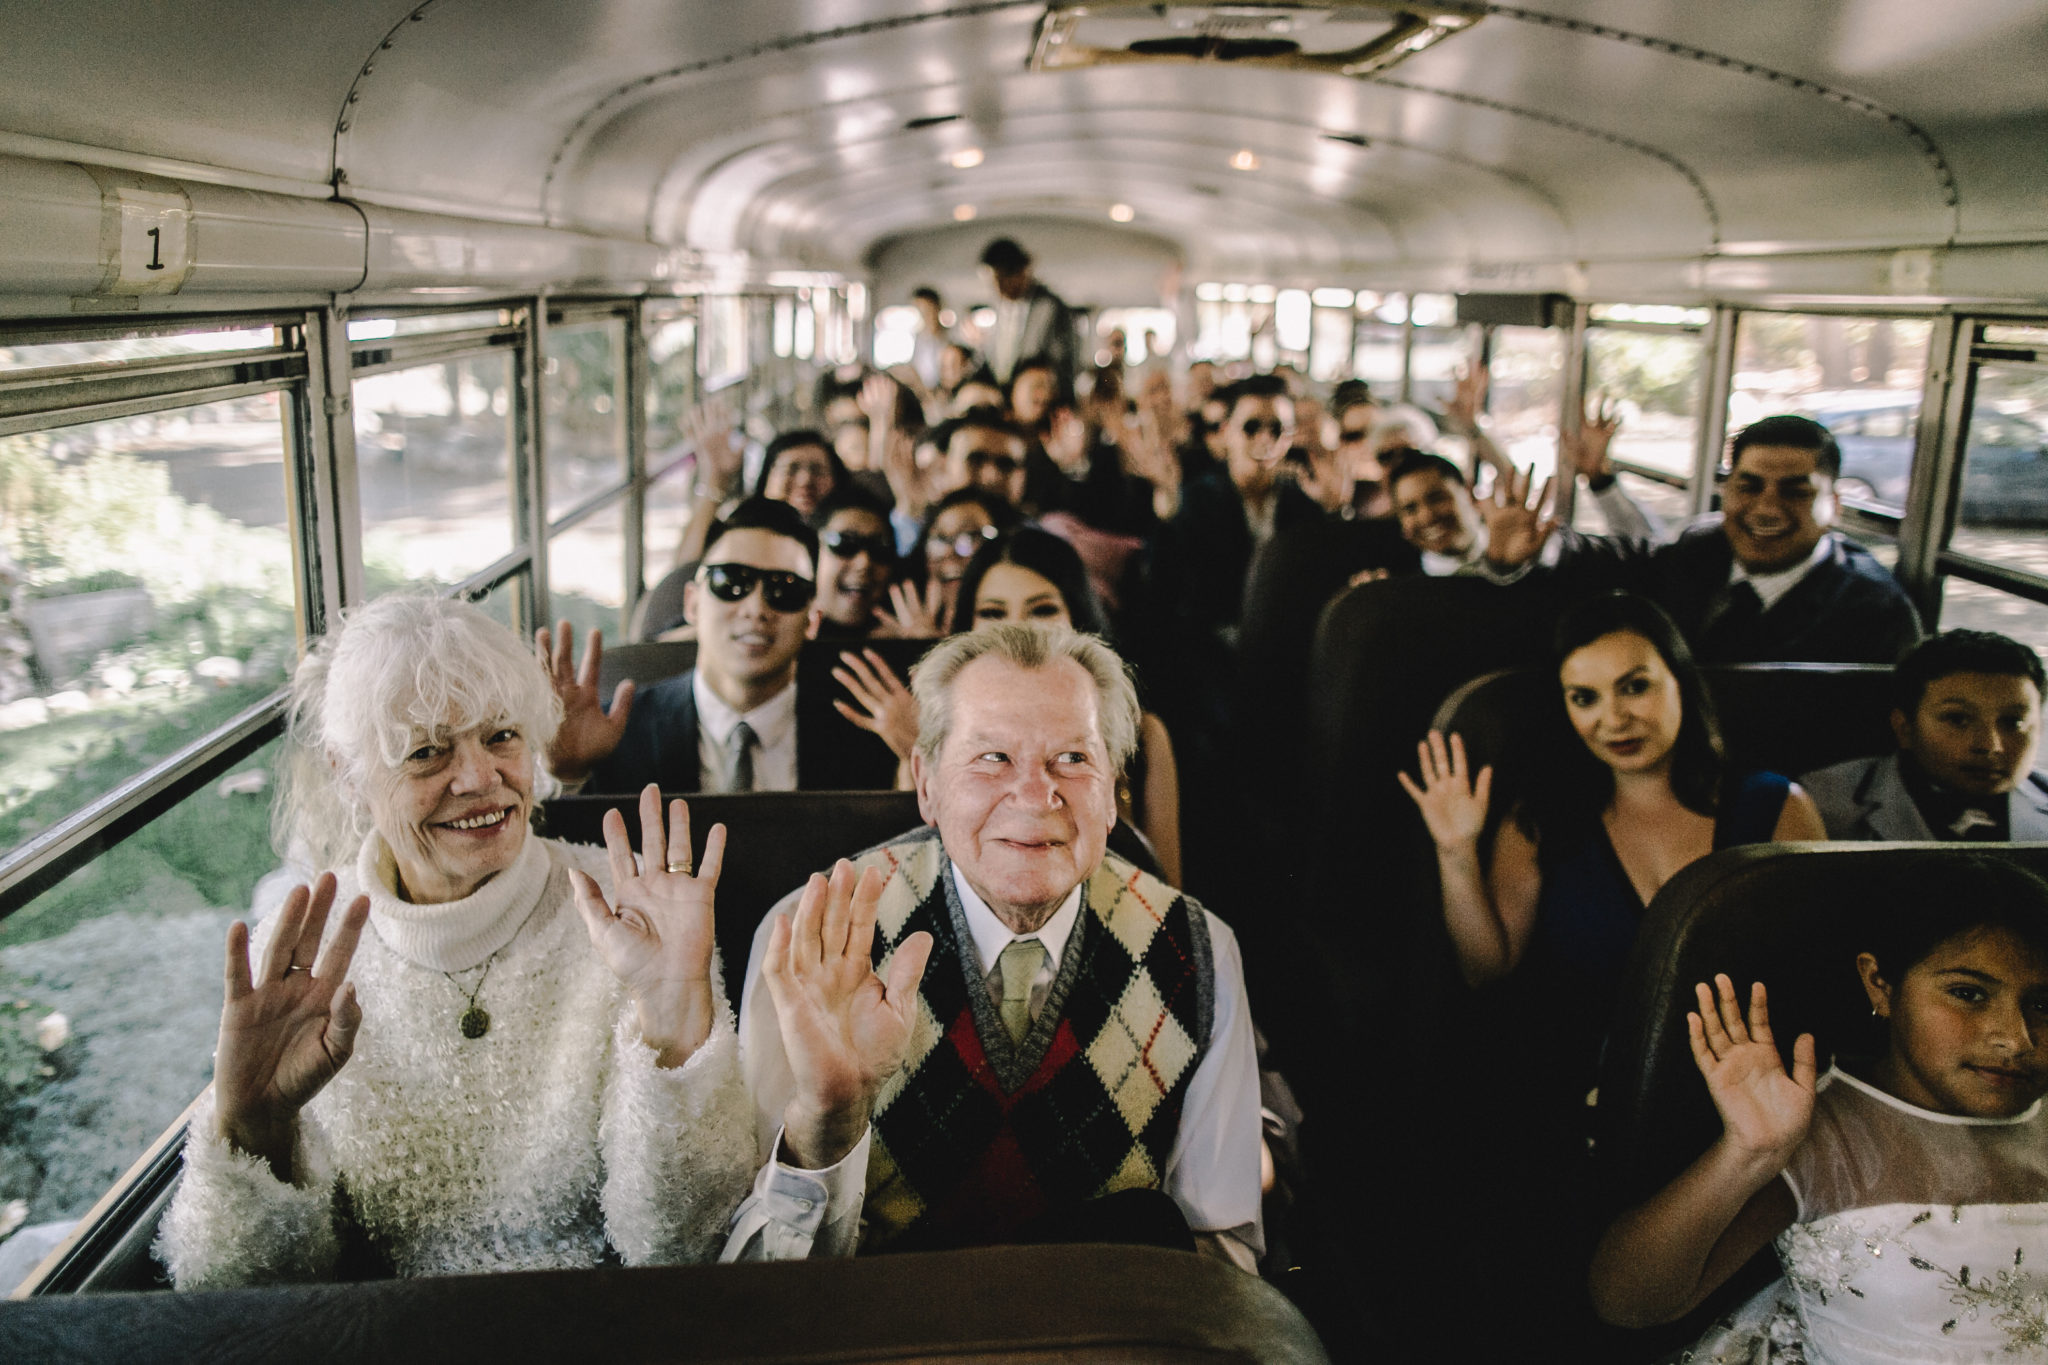 bus full of people of all ages, older couple at the front in focus